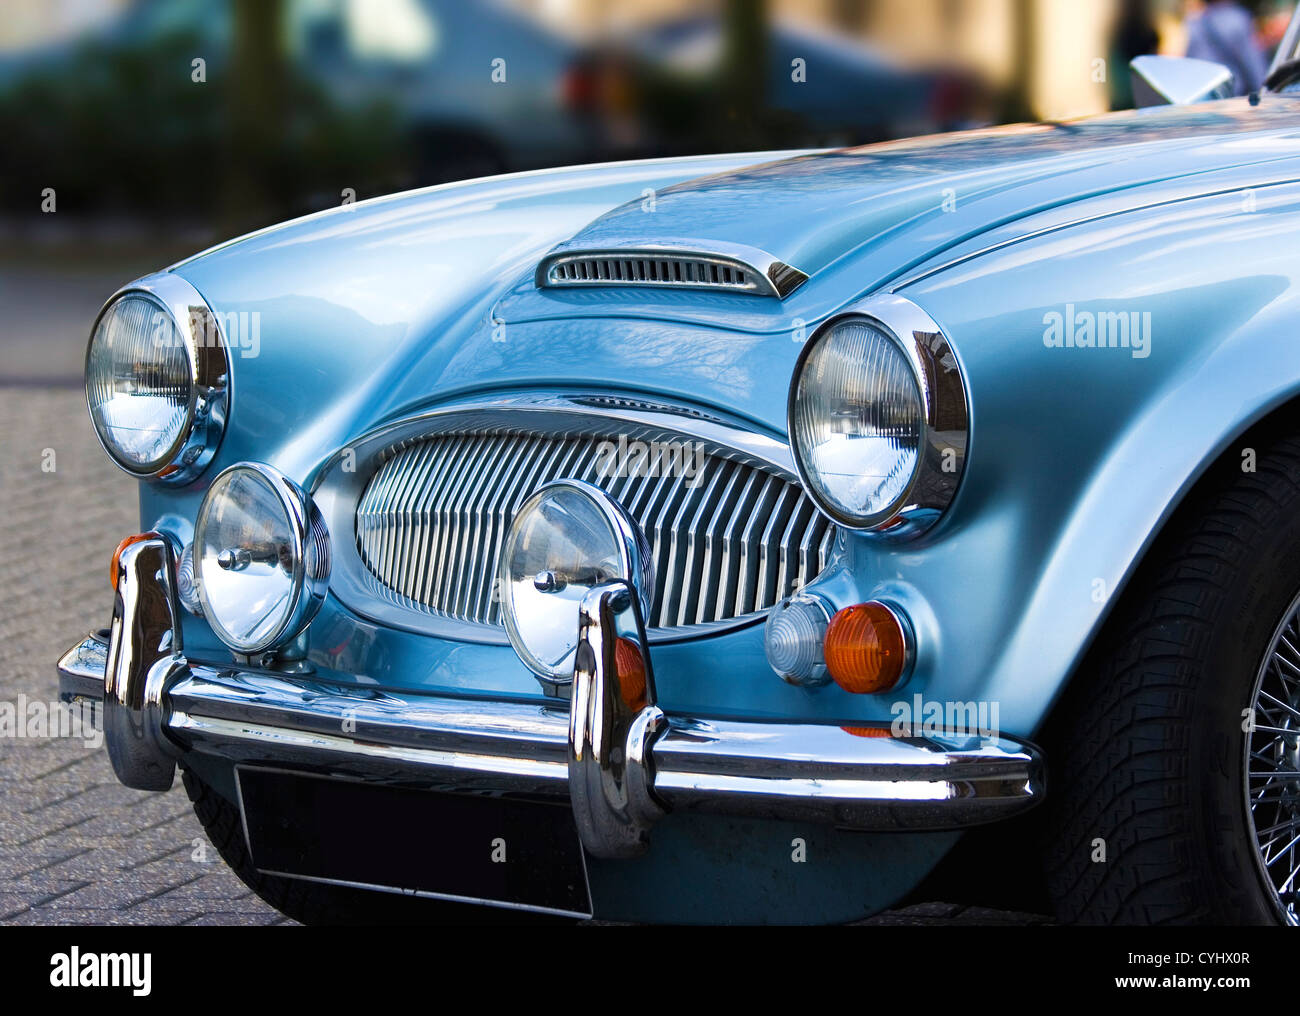 A classic shiny metallic blue sports car on the streets Stock Photo